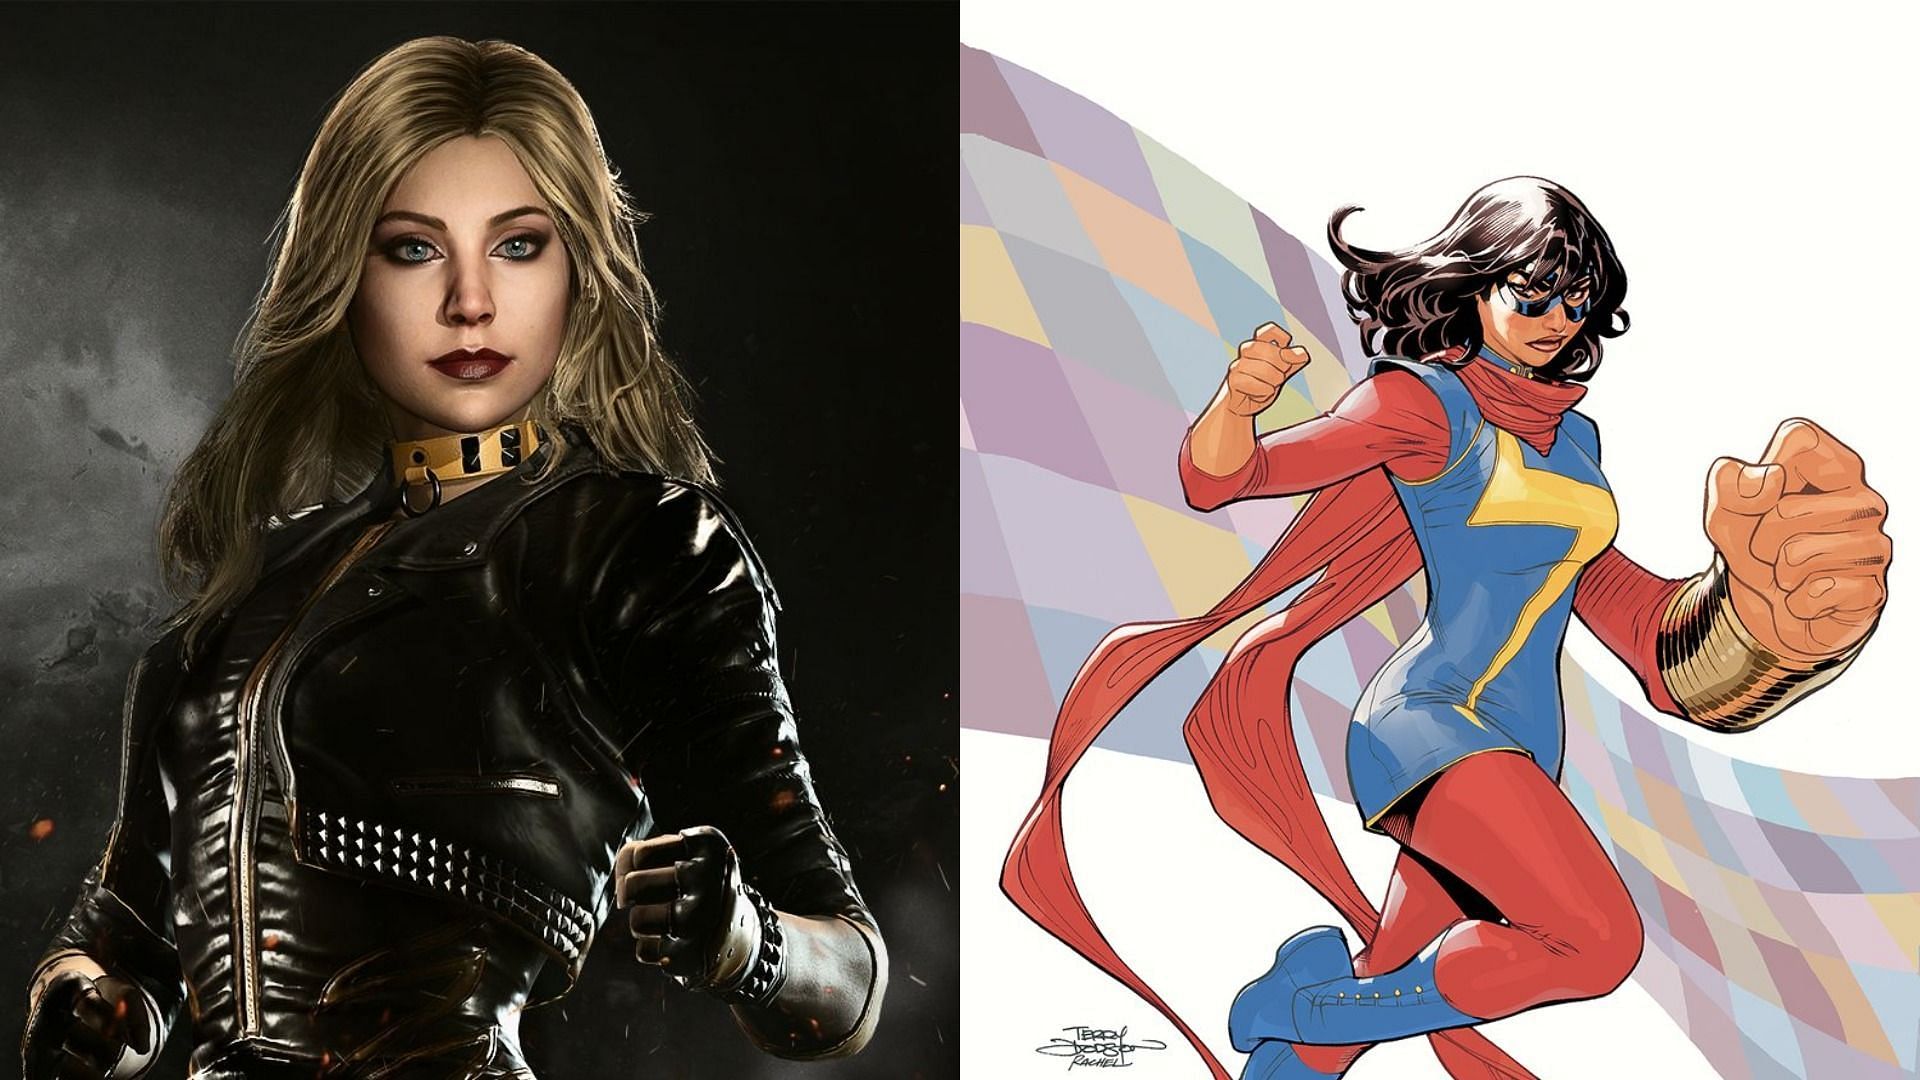 Female comic book heroes are slowly growing in number and stature (Image via DC/Marvel)